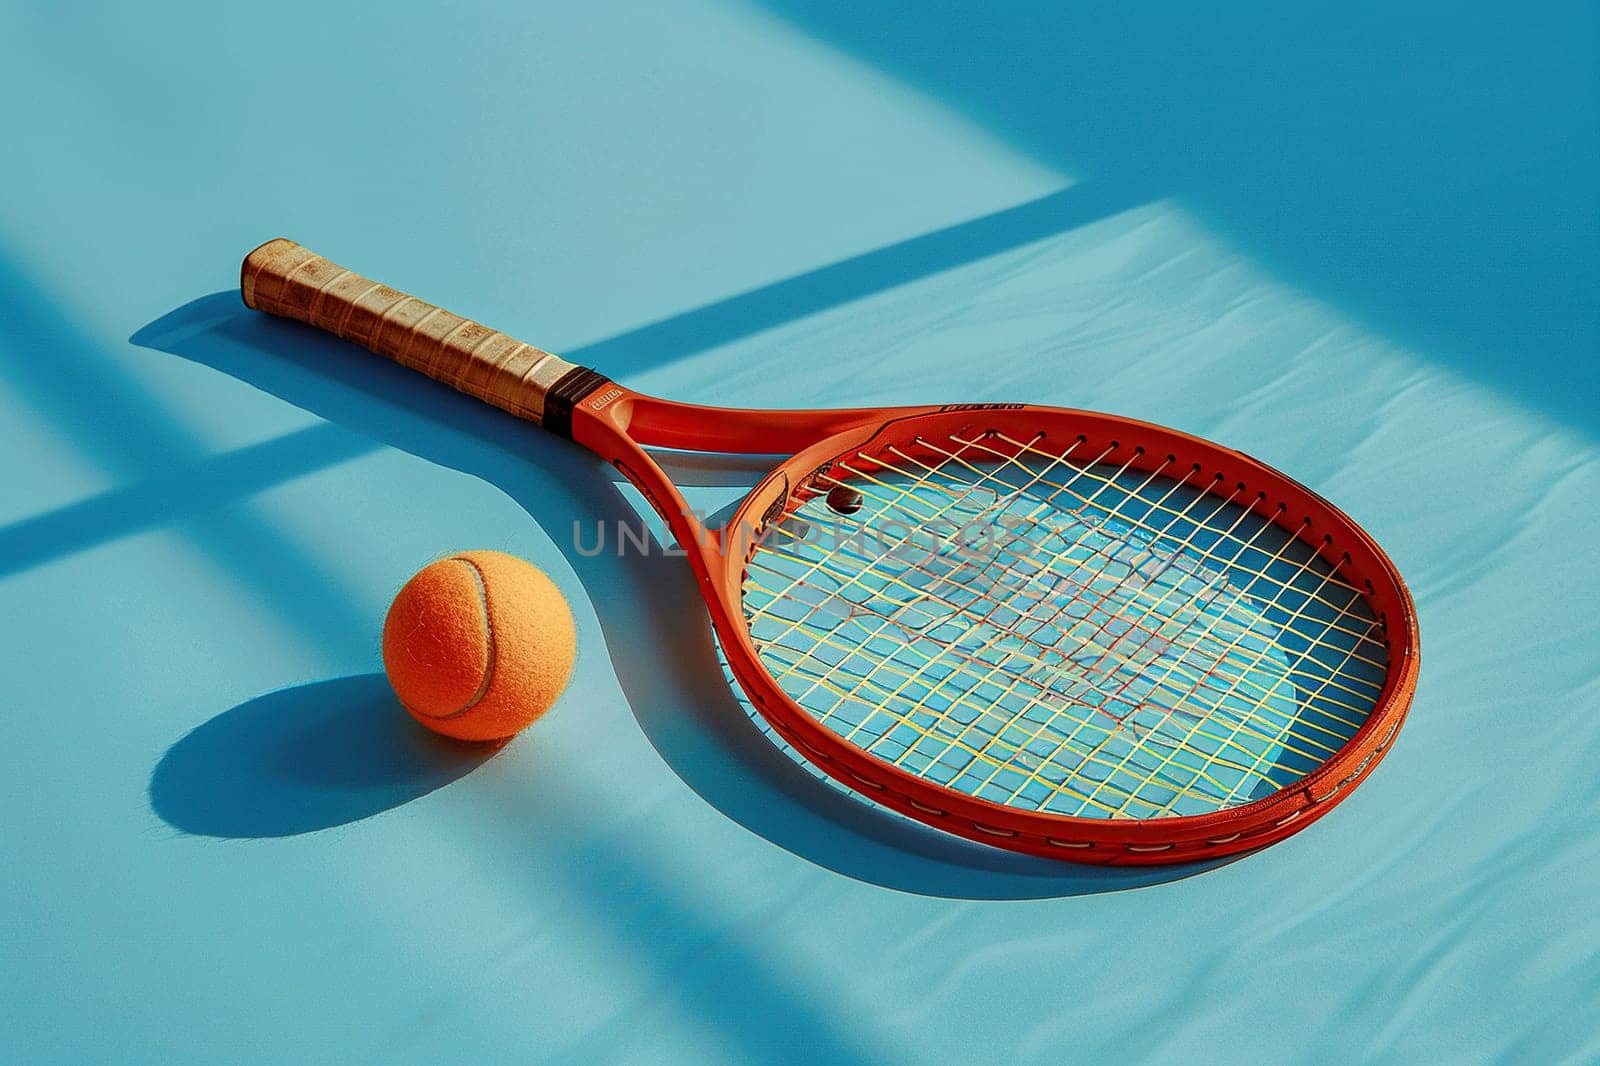 Racket and white tennis ball for table tennis on a blue background.